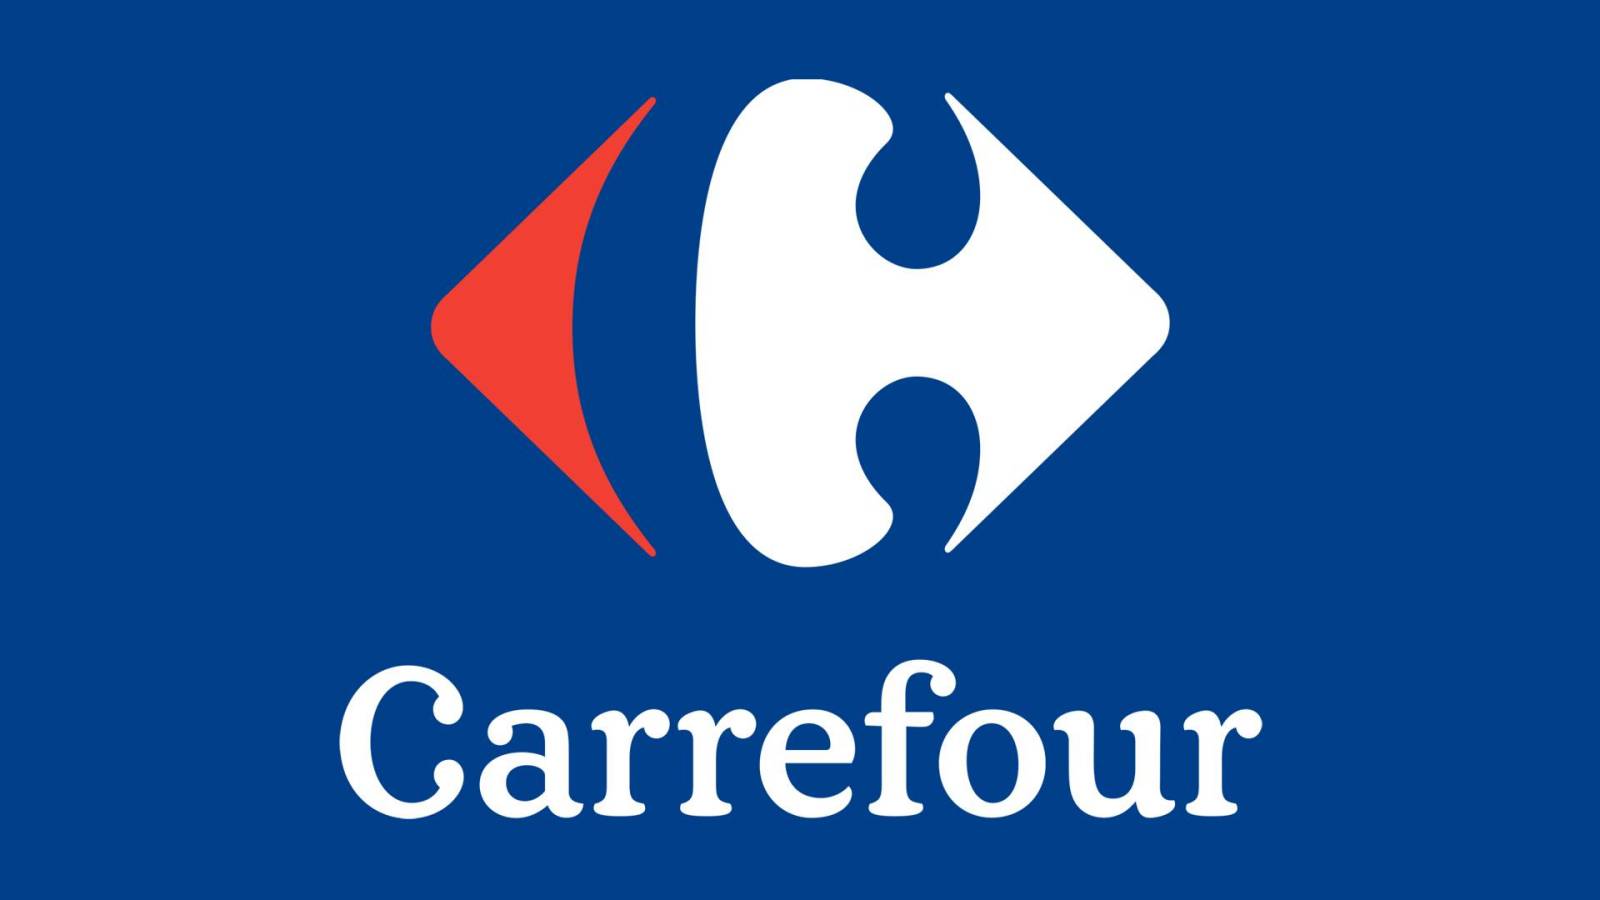 Carrefour Official Information FREE DACIA Car for Romanian Customers